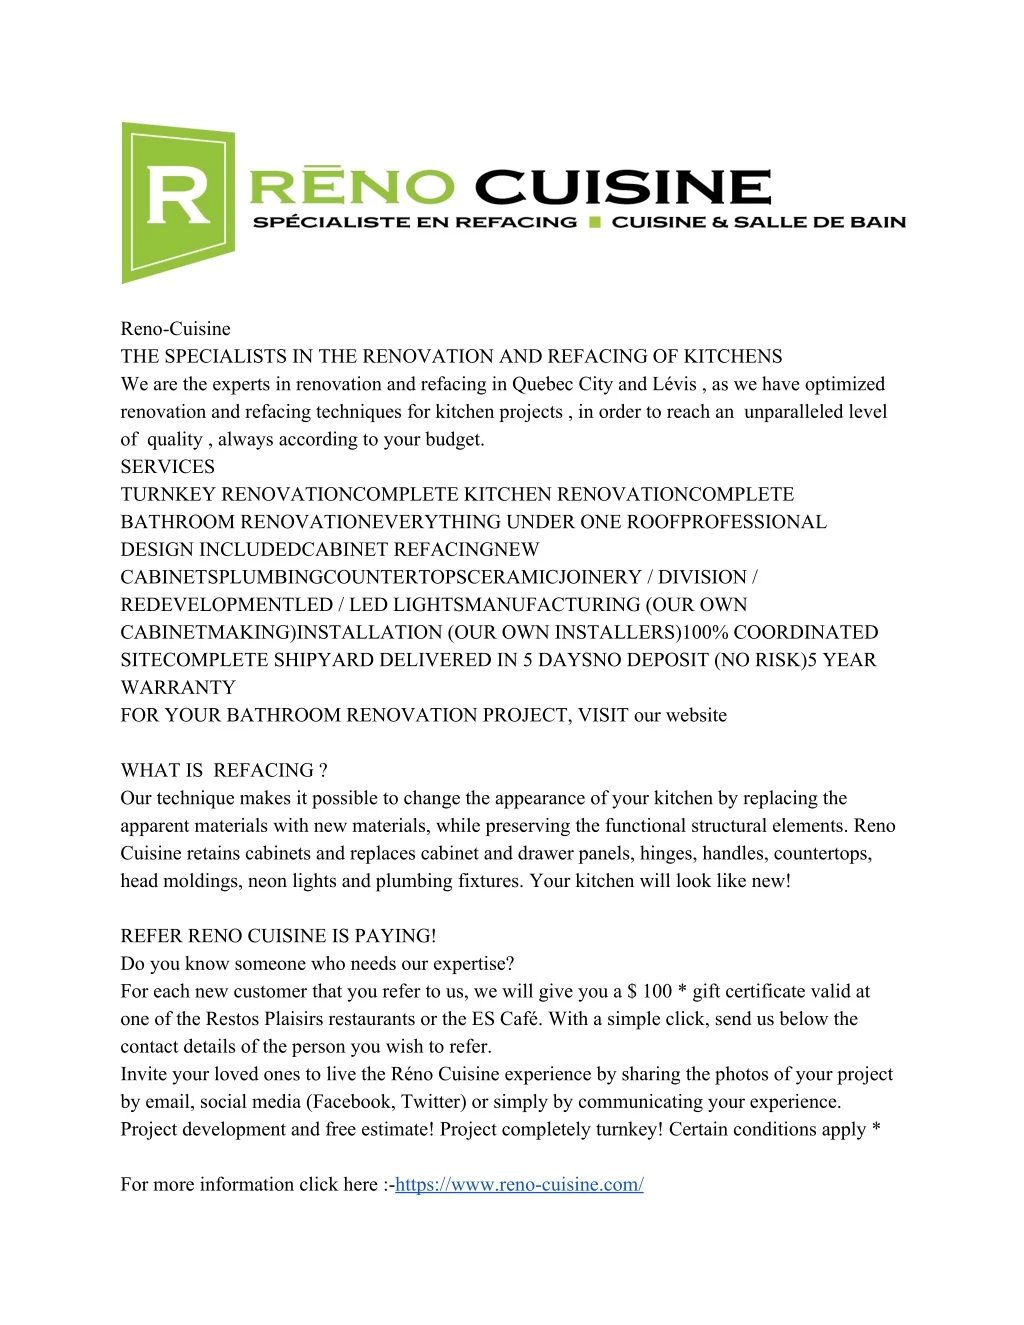 reno cuisine the specialists in the renovation